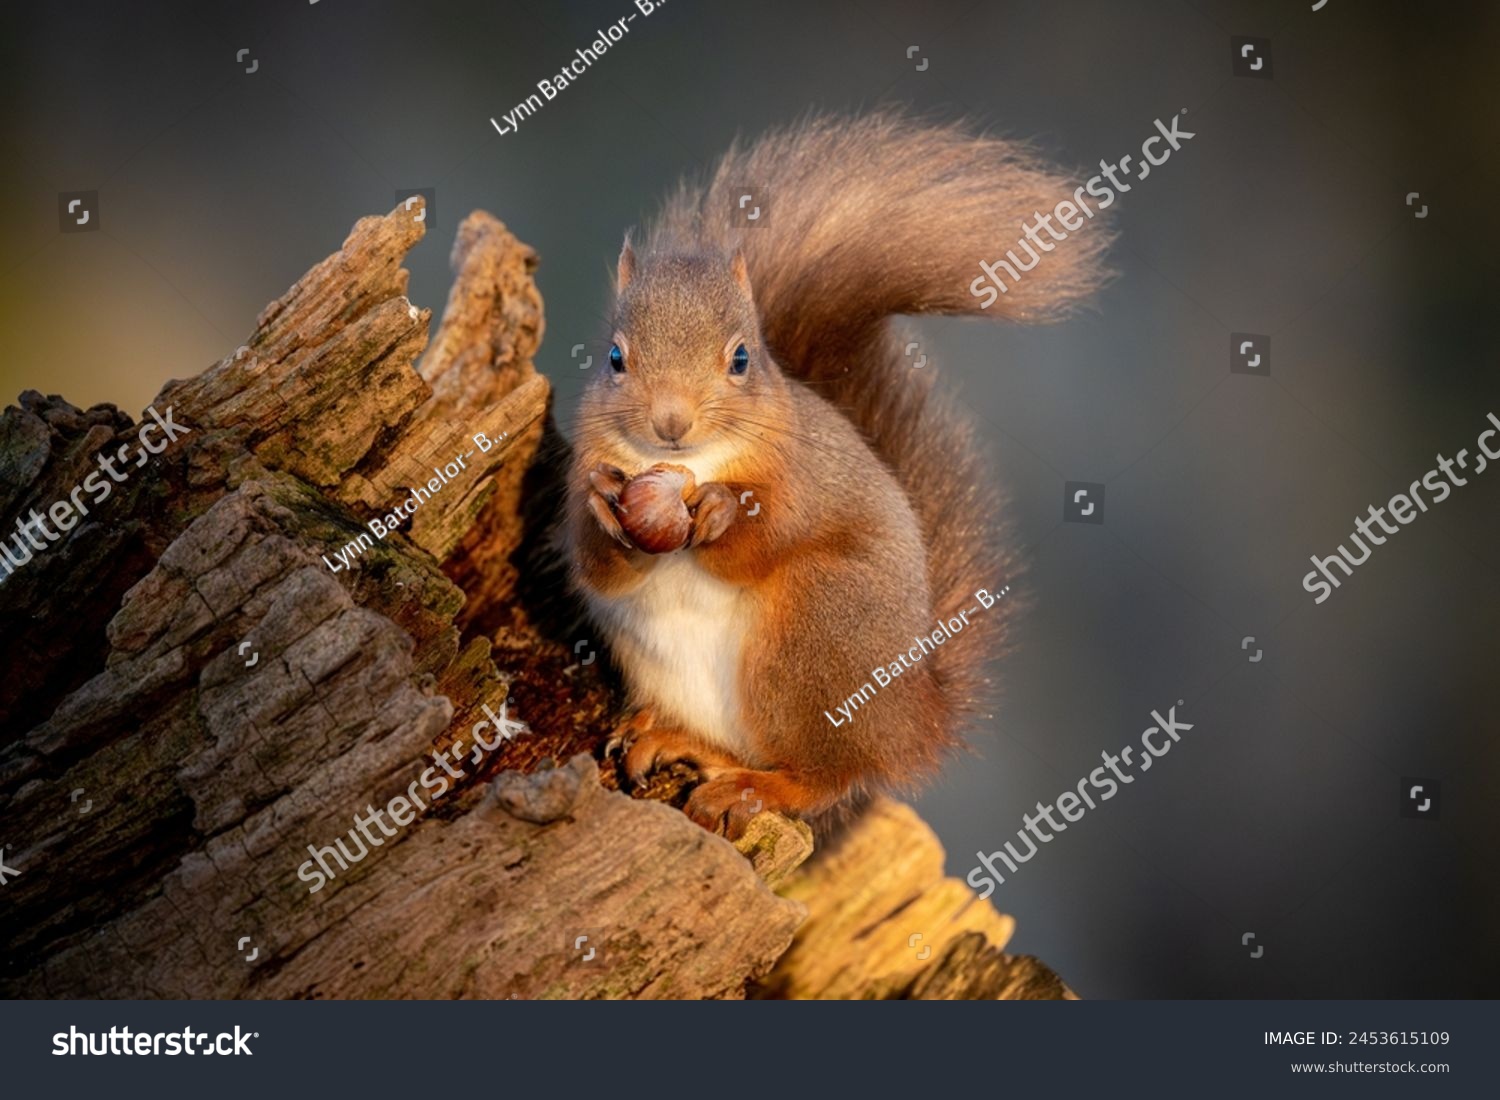 Young Scottish Red Squirrel with bushy tail sitting on tree stump holding a hazelnut  #2453615109